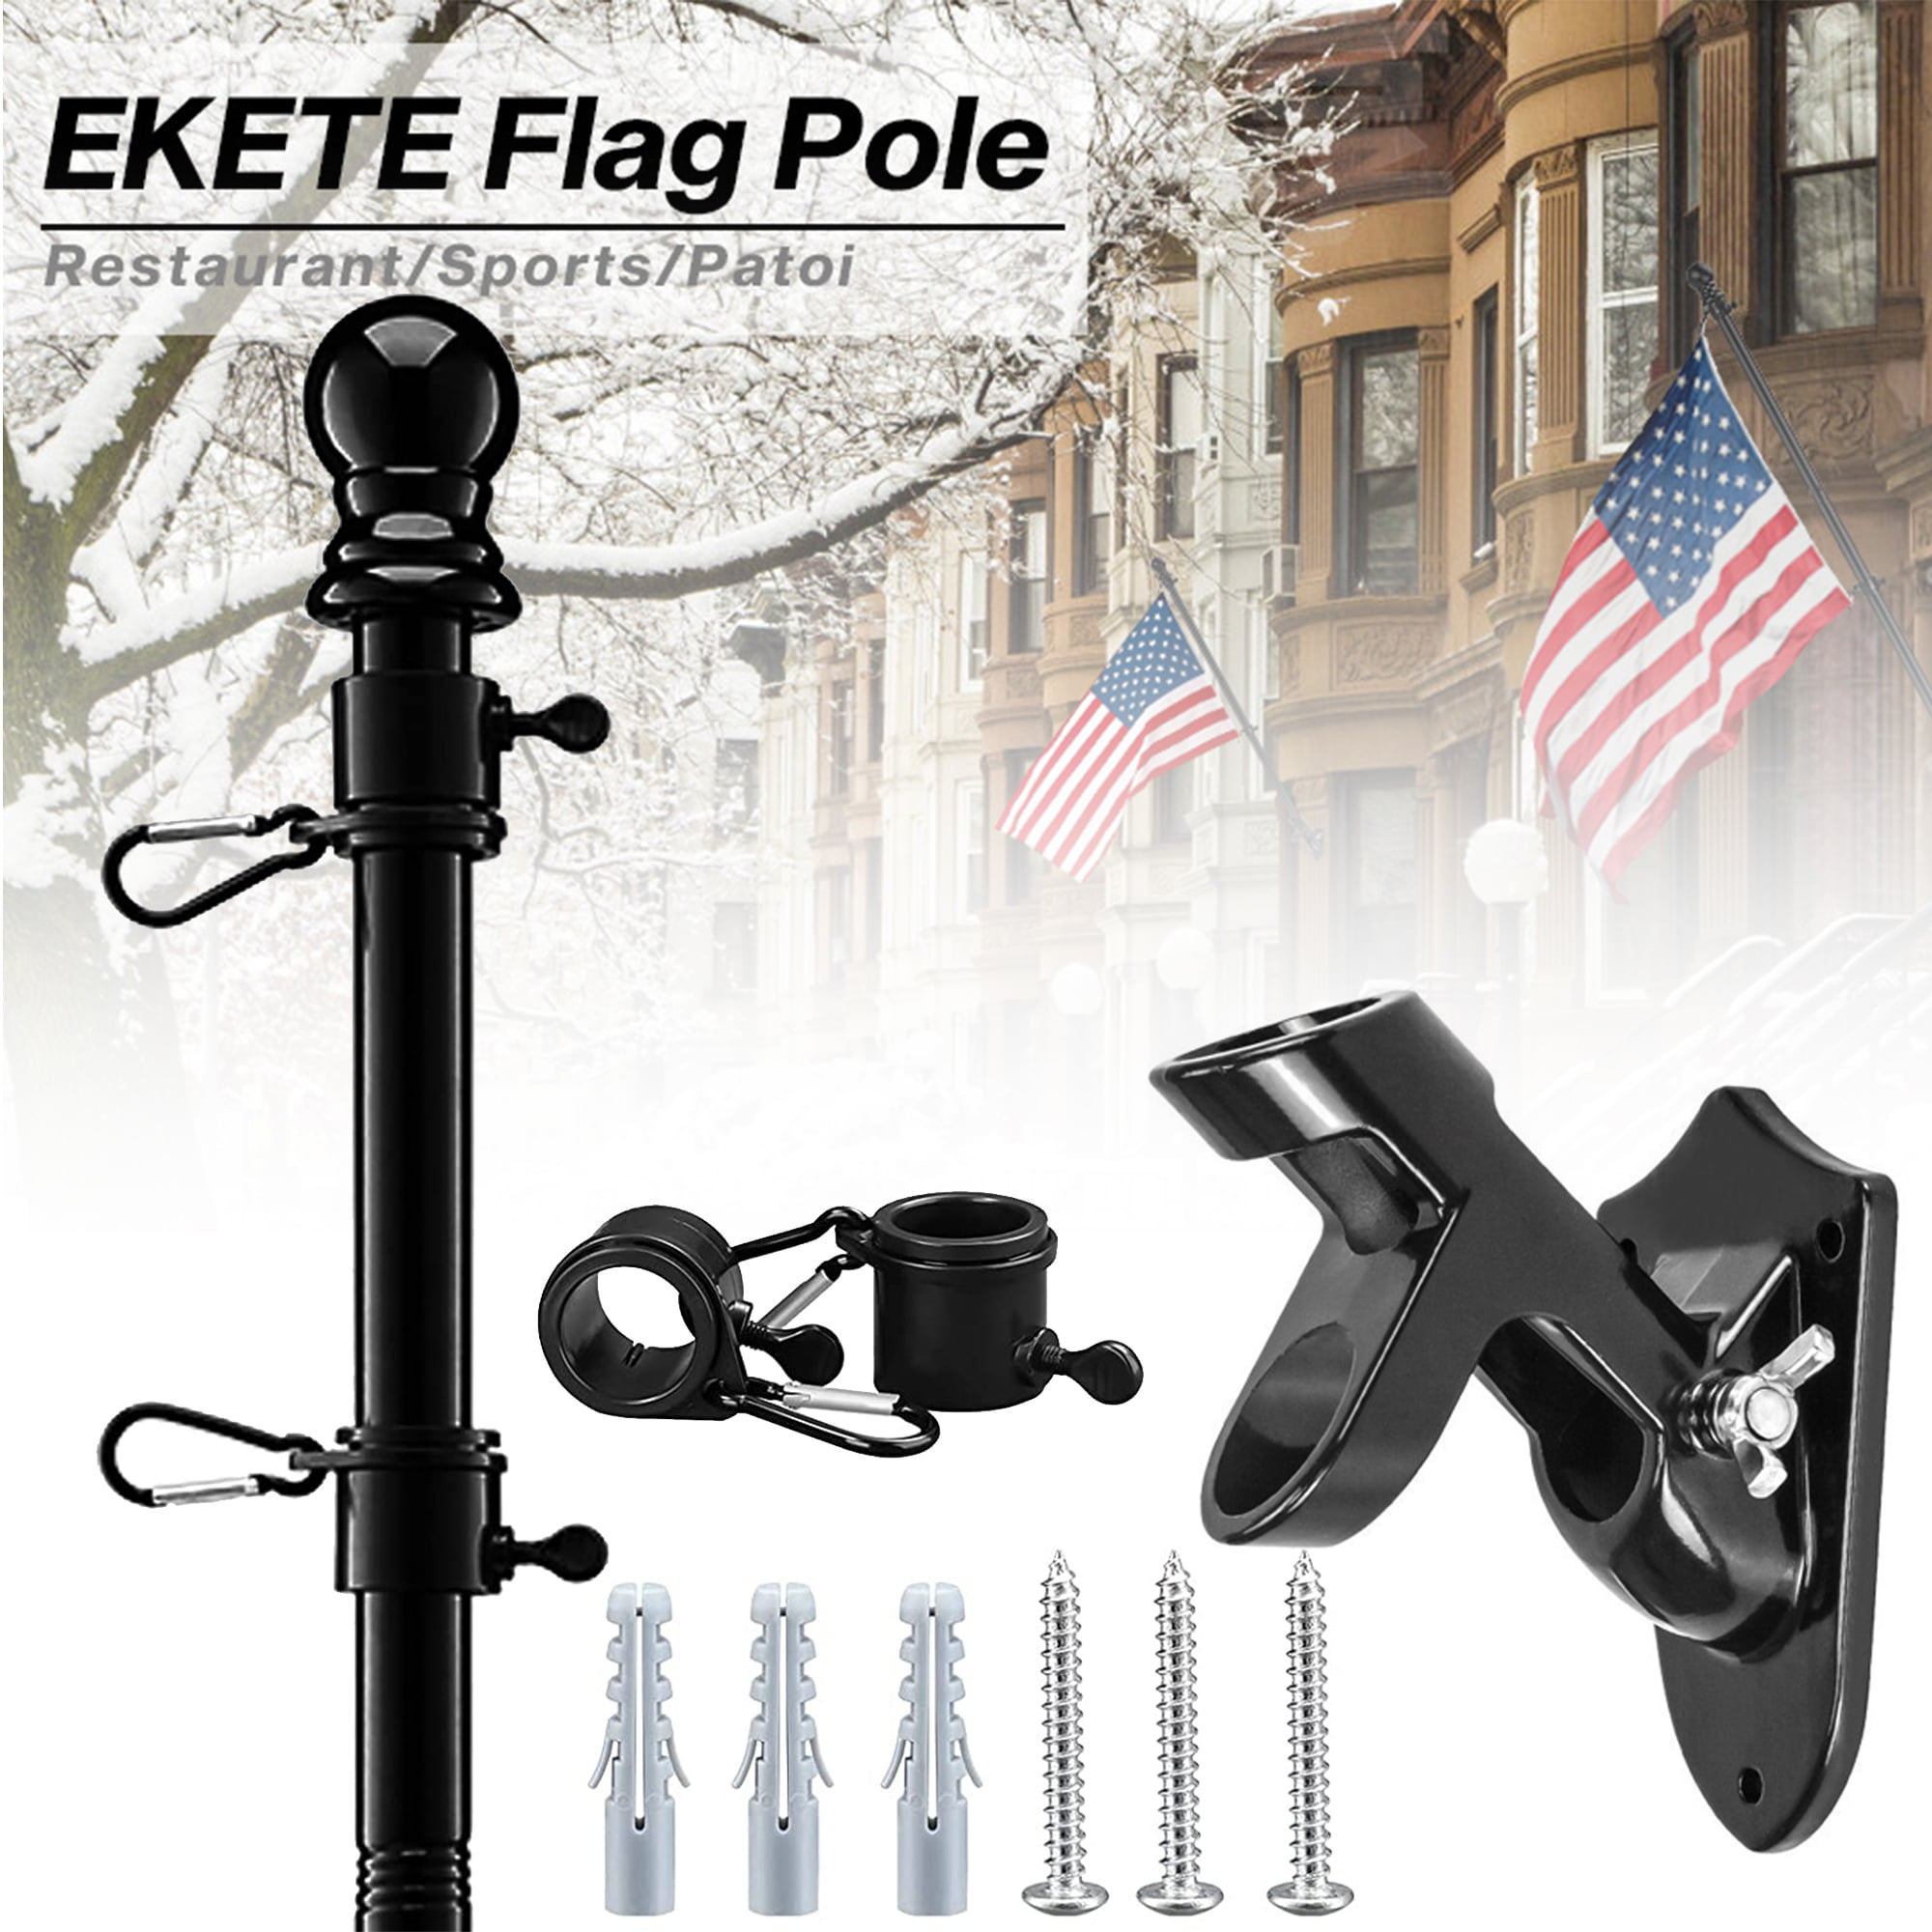 6 FT Flagpole Kit for American Flag Professional Metal Flag Pole with Bracket 